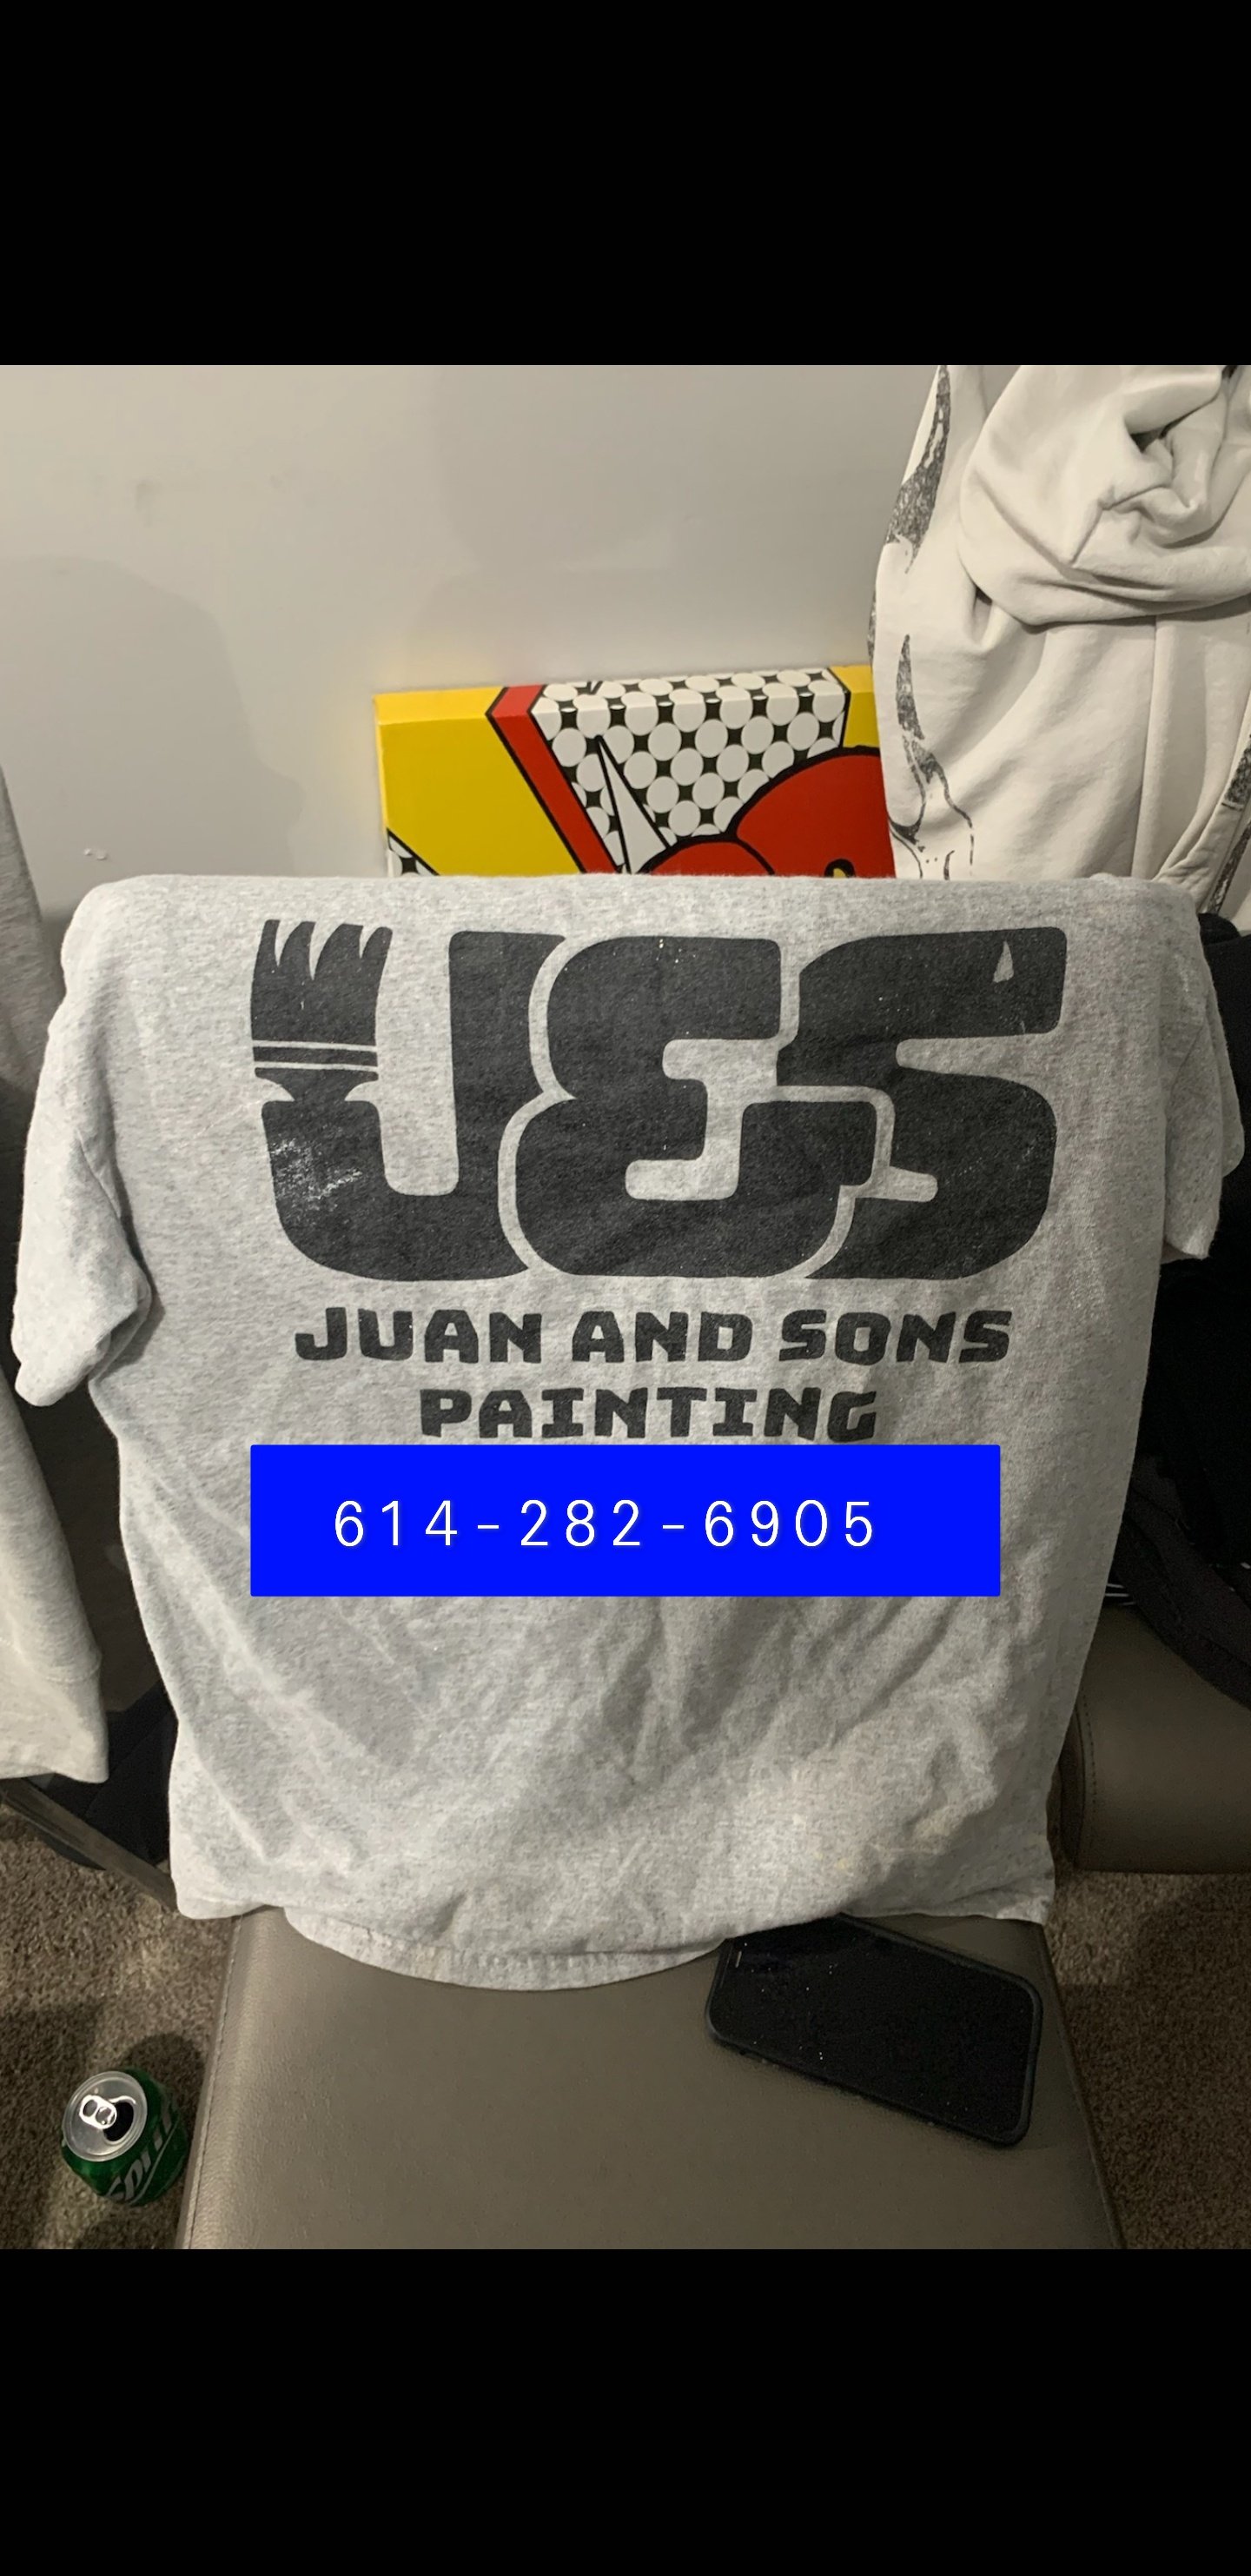 Juan's and Sons Painting Logo